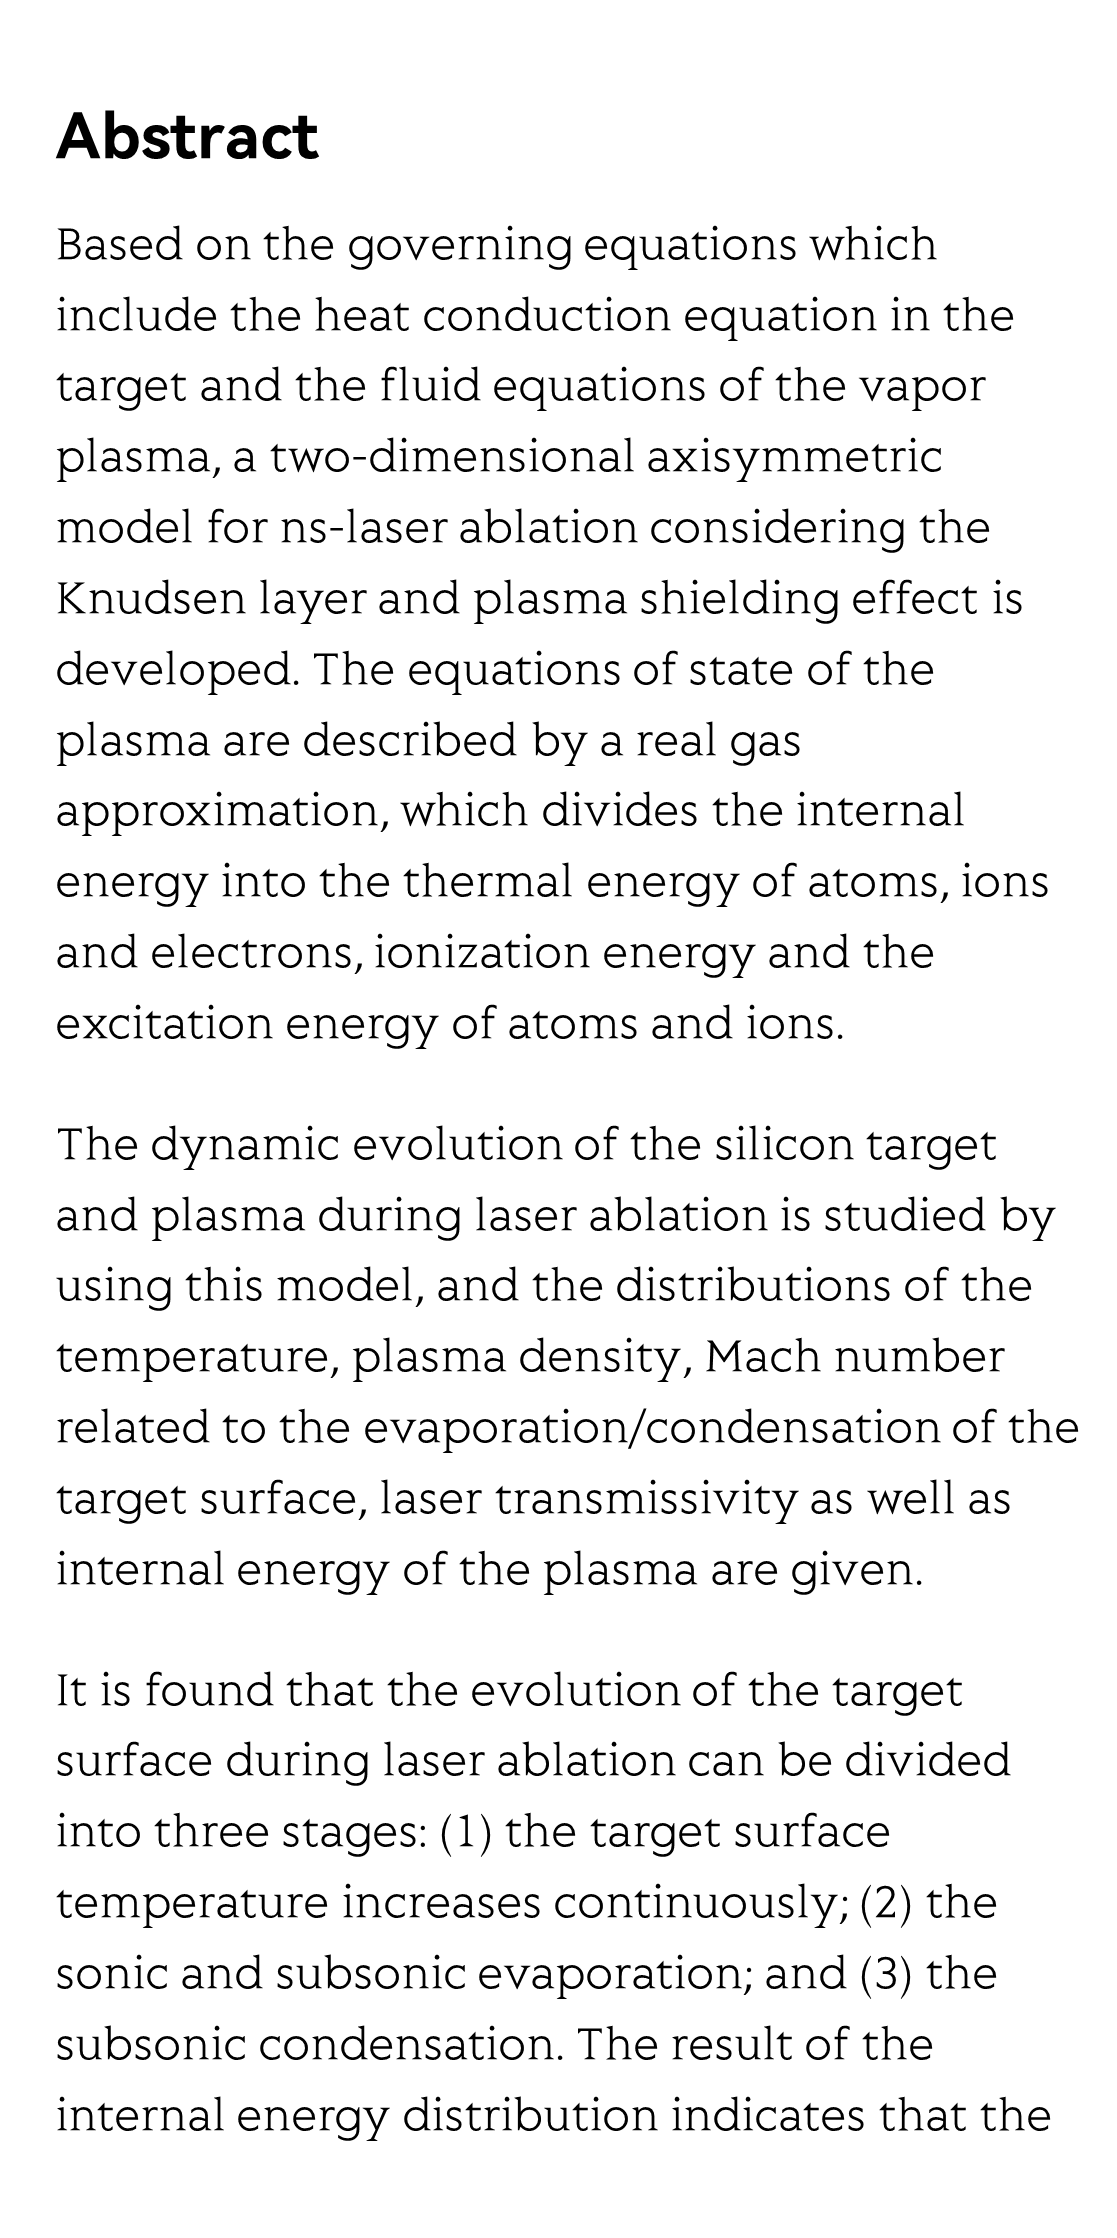 Numerical simulation of nanosecond laser ablation and plasma characteristics considering a real gas equation of state_2